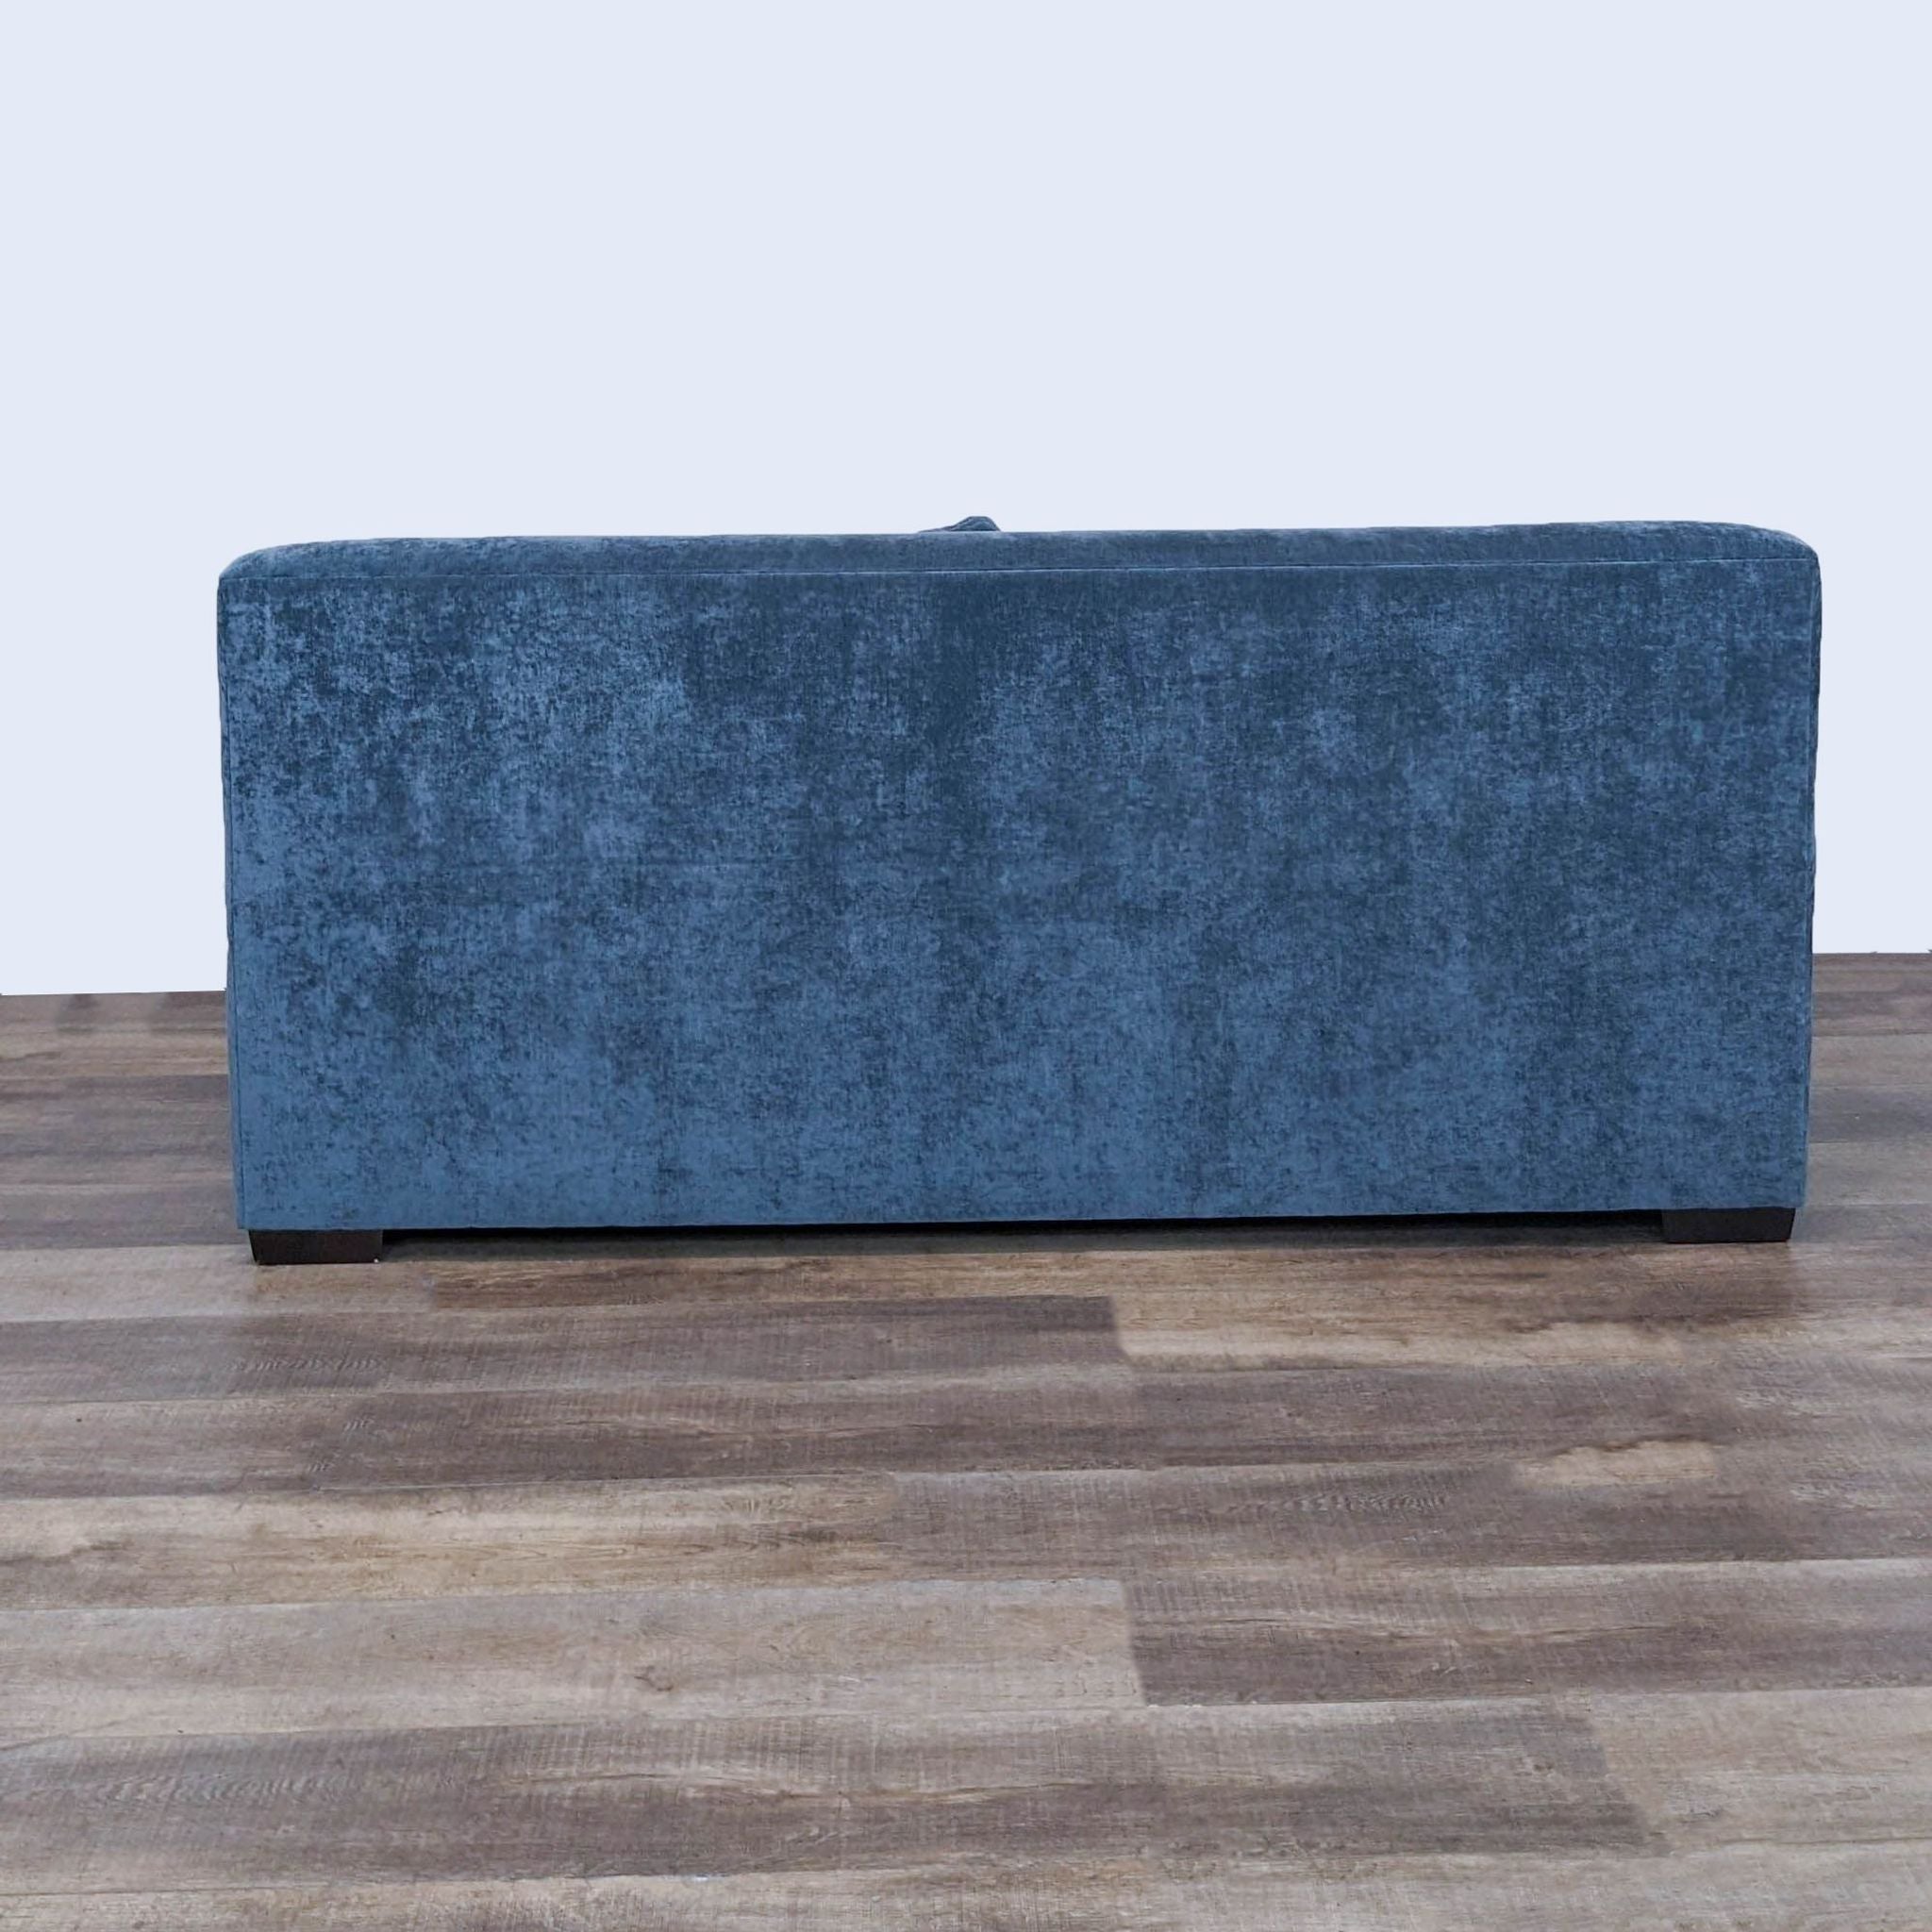 Rear view of Harvest Furniture's blue fabric high-back 3-seat sofa with block arms on a wooden floor.